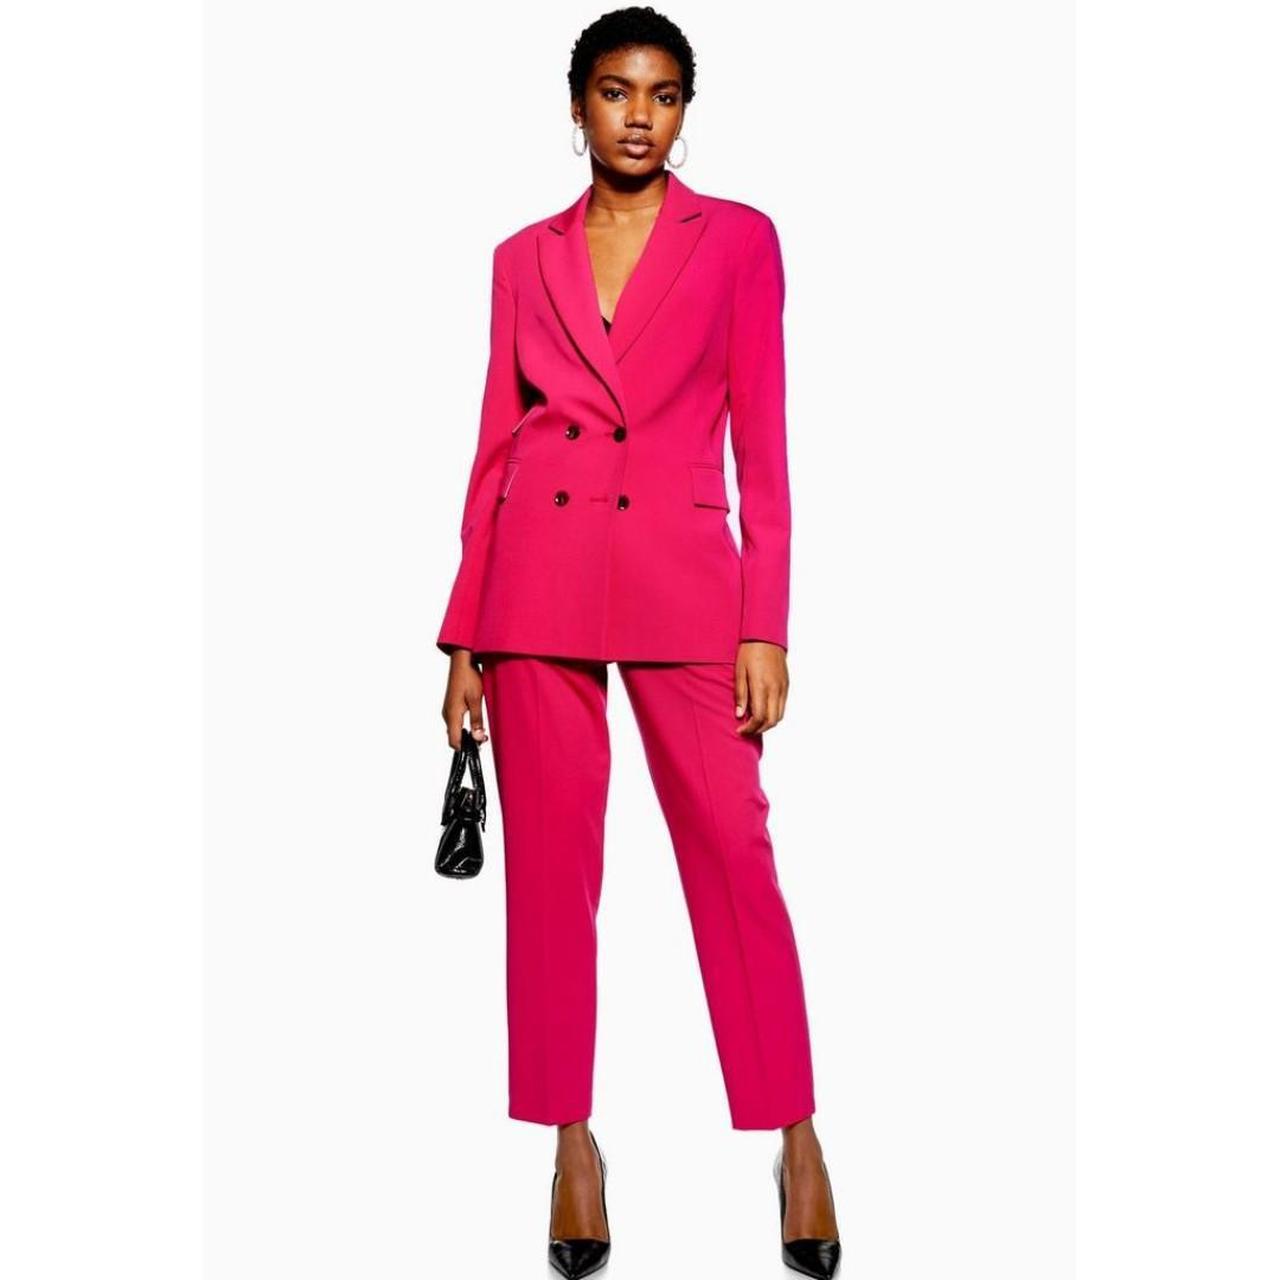 TOPSHOP FUSHIA PINK BLAZER AND TAPERED TROUSERS SUIT - Depop